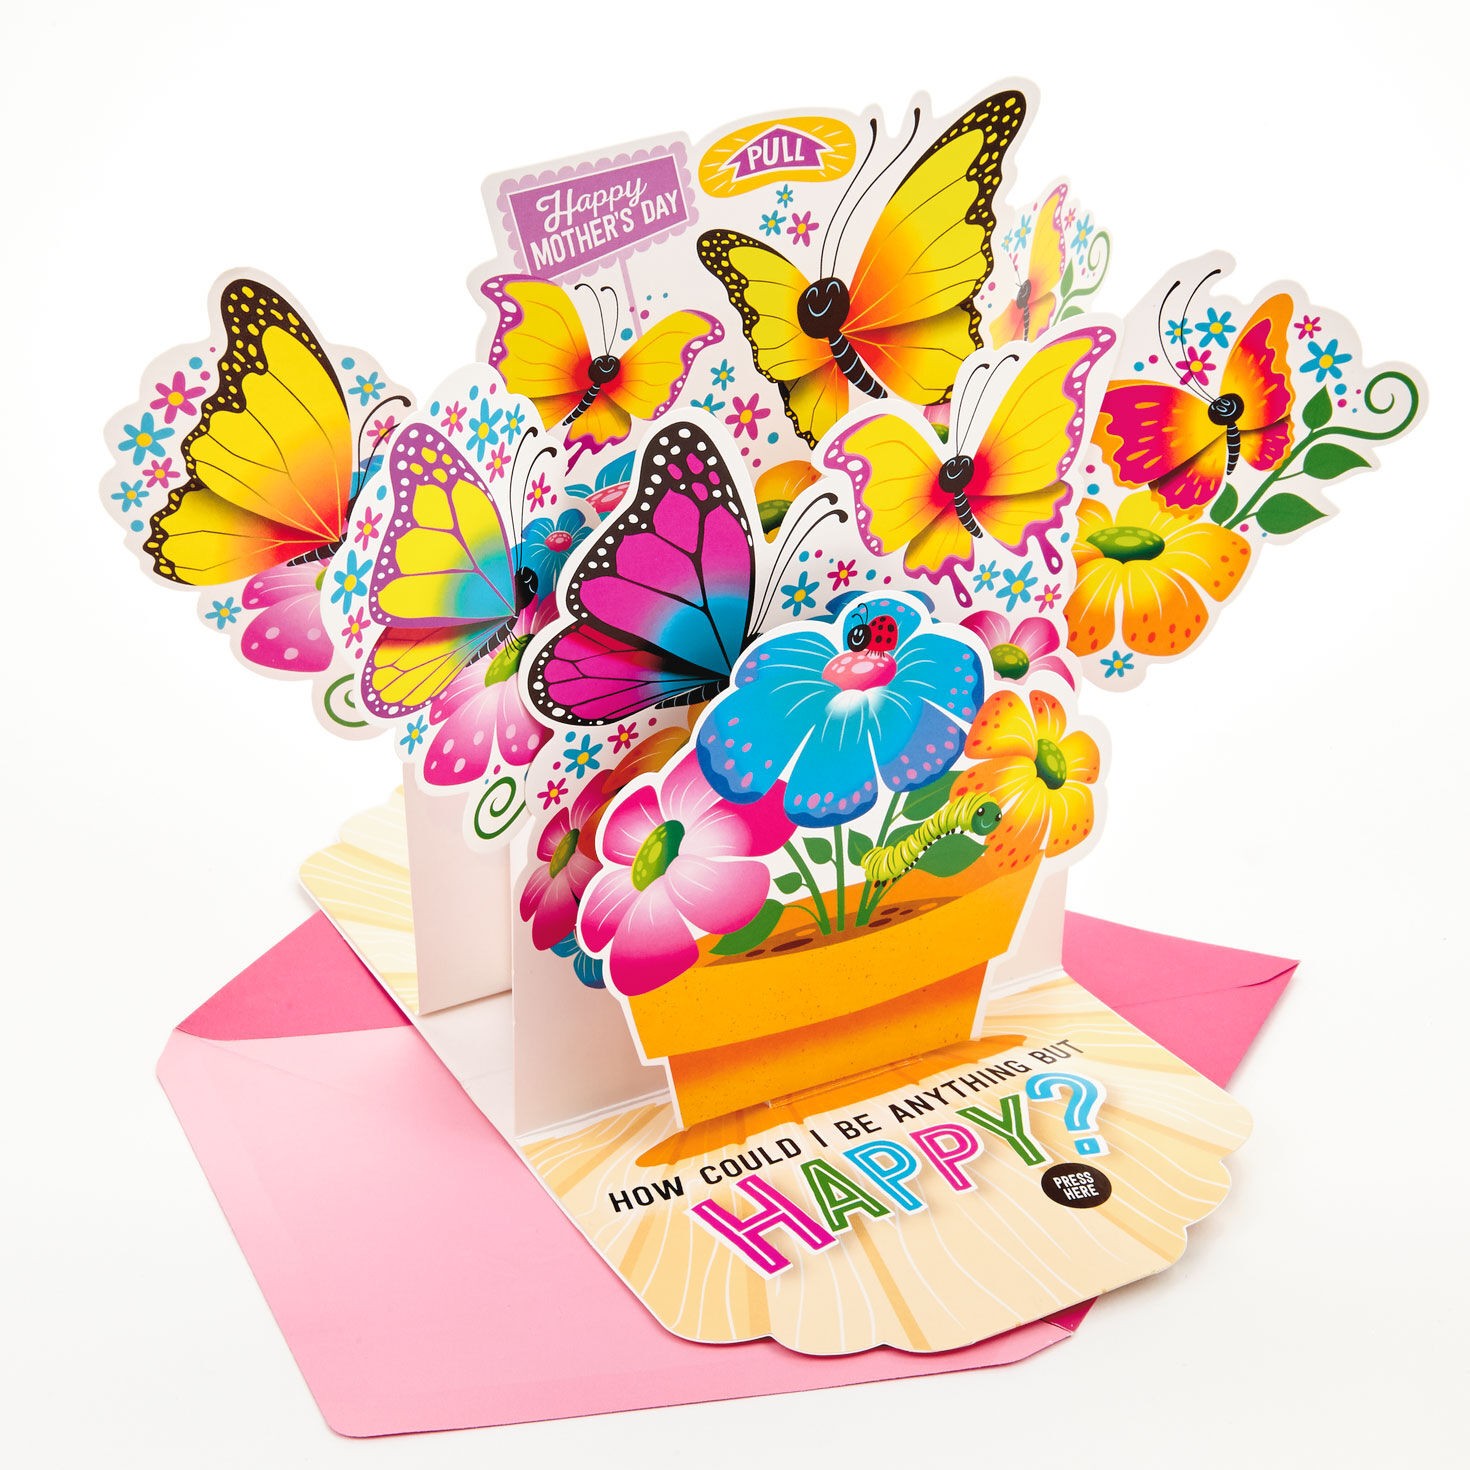 Butterfly, A Beautiful Day Hallmark Mothers Day Card 499MBC2034 